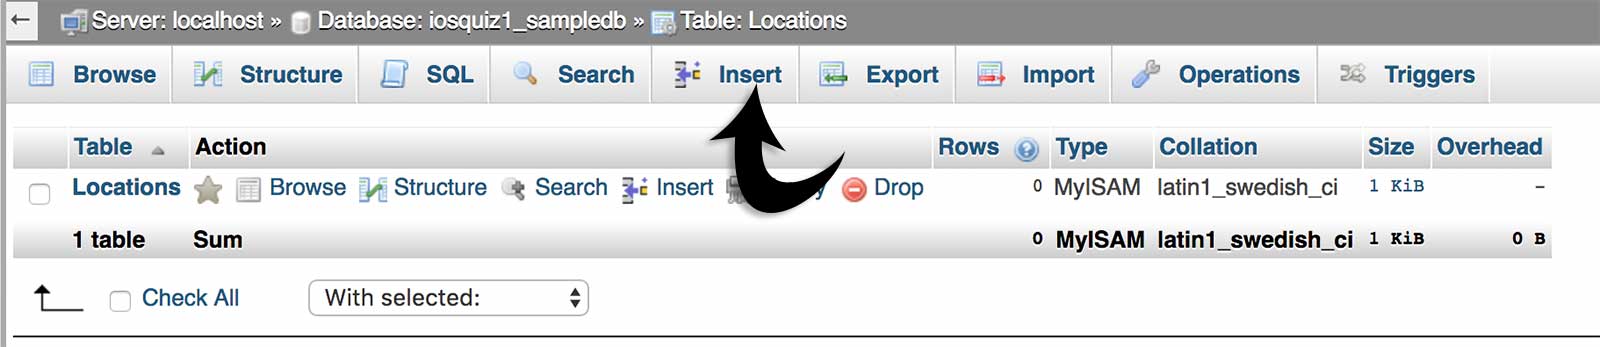 Inserting data into the database table